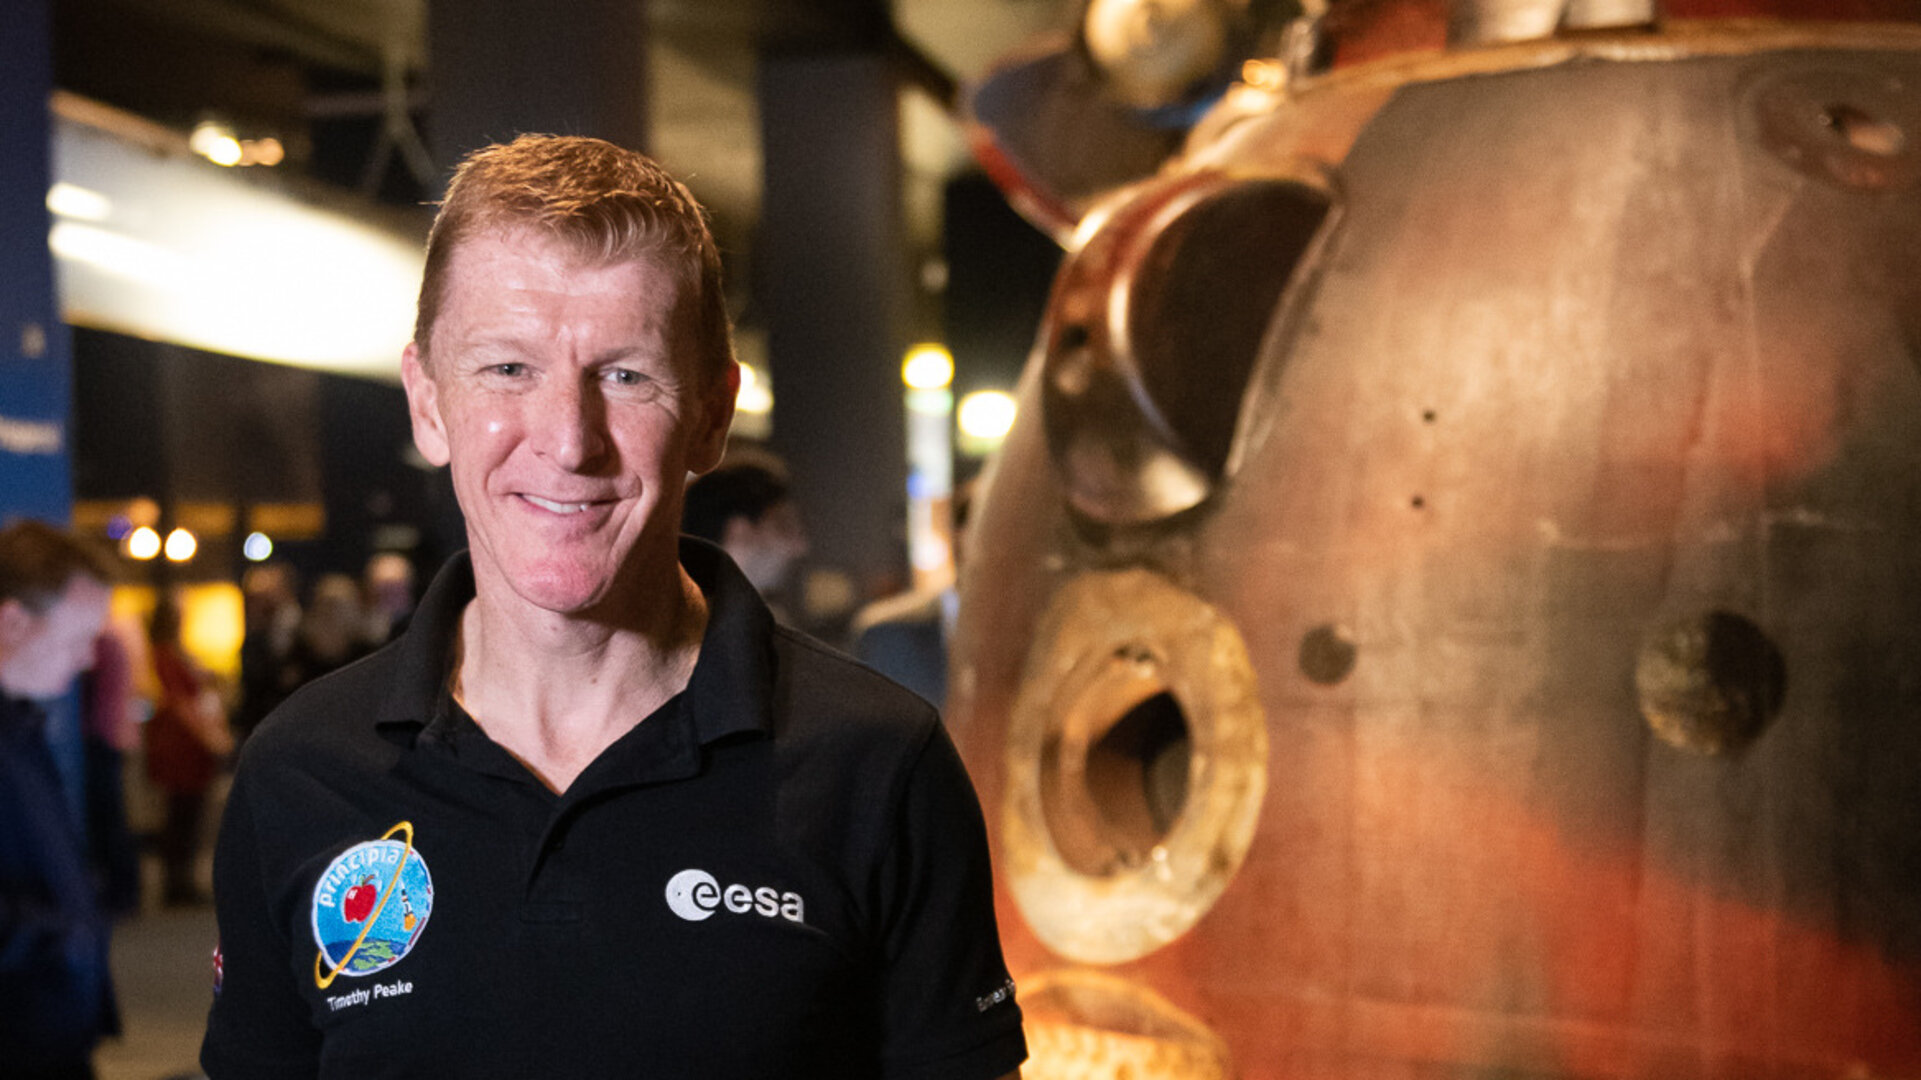 ESA astronaut Tim Peake welcomes the return to the Science Museum in London of the Soyuz descent module in which he travelled